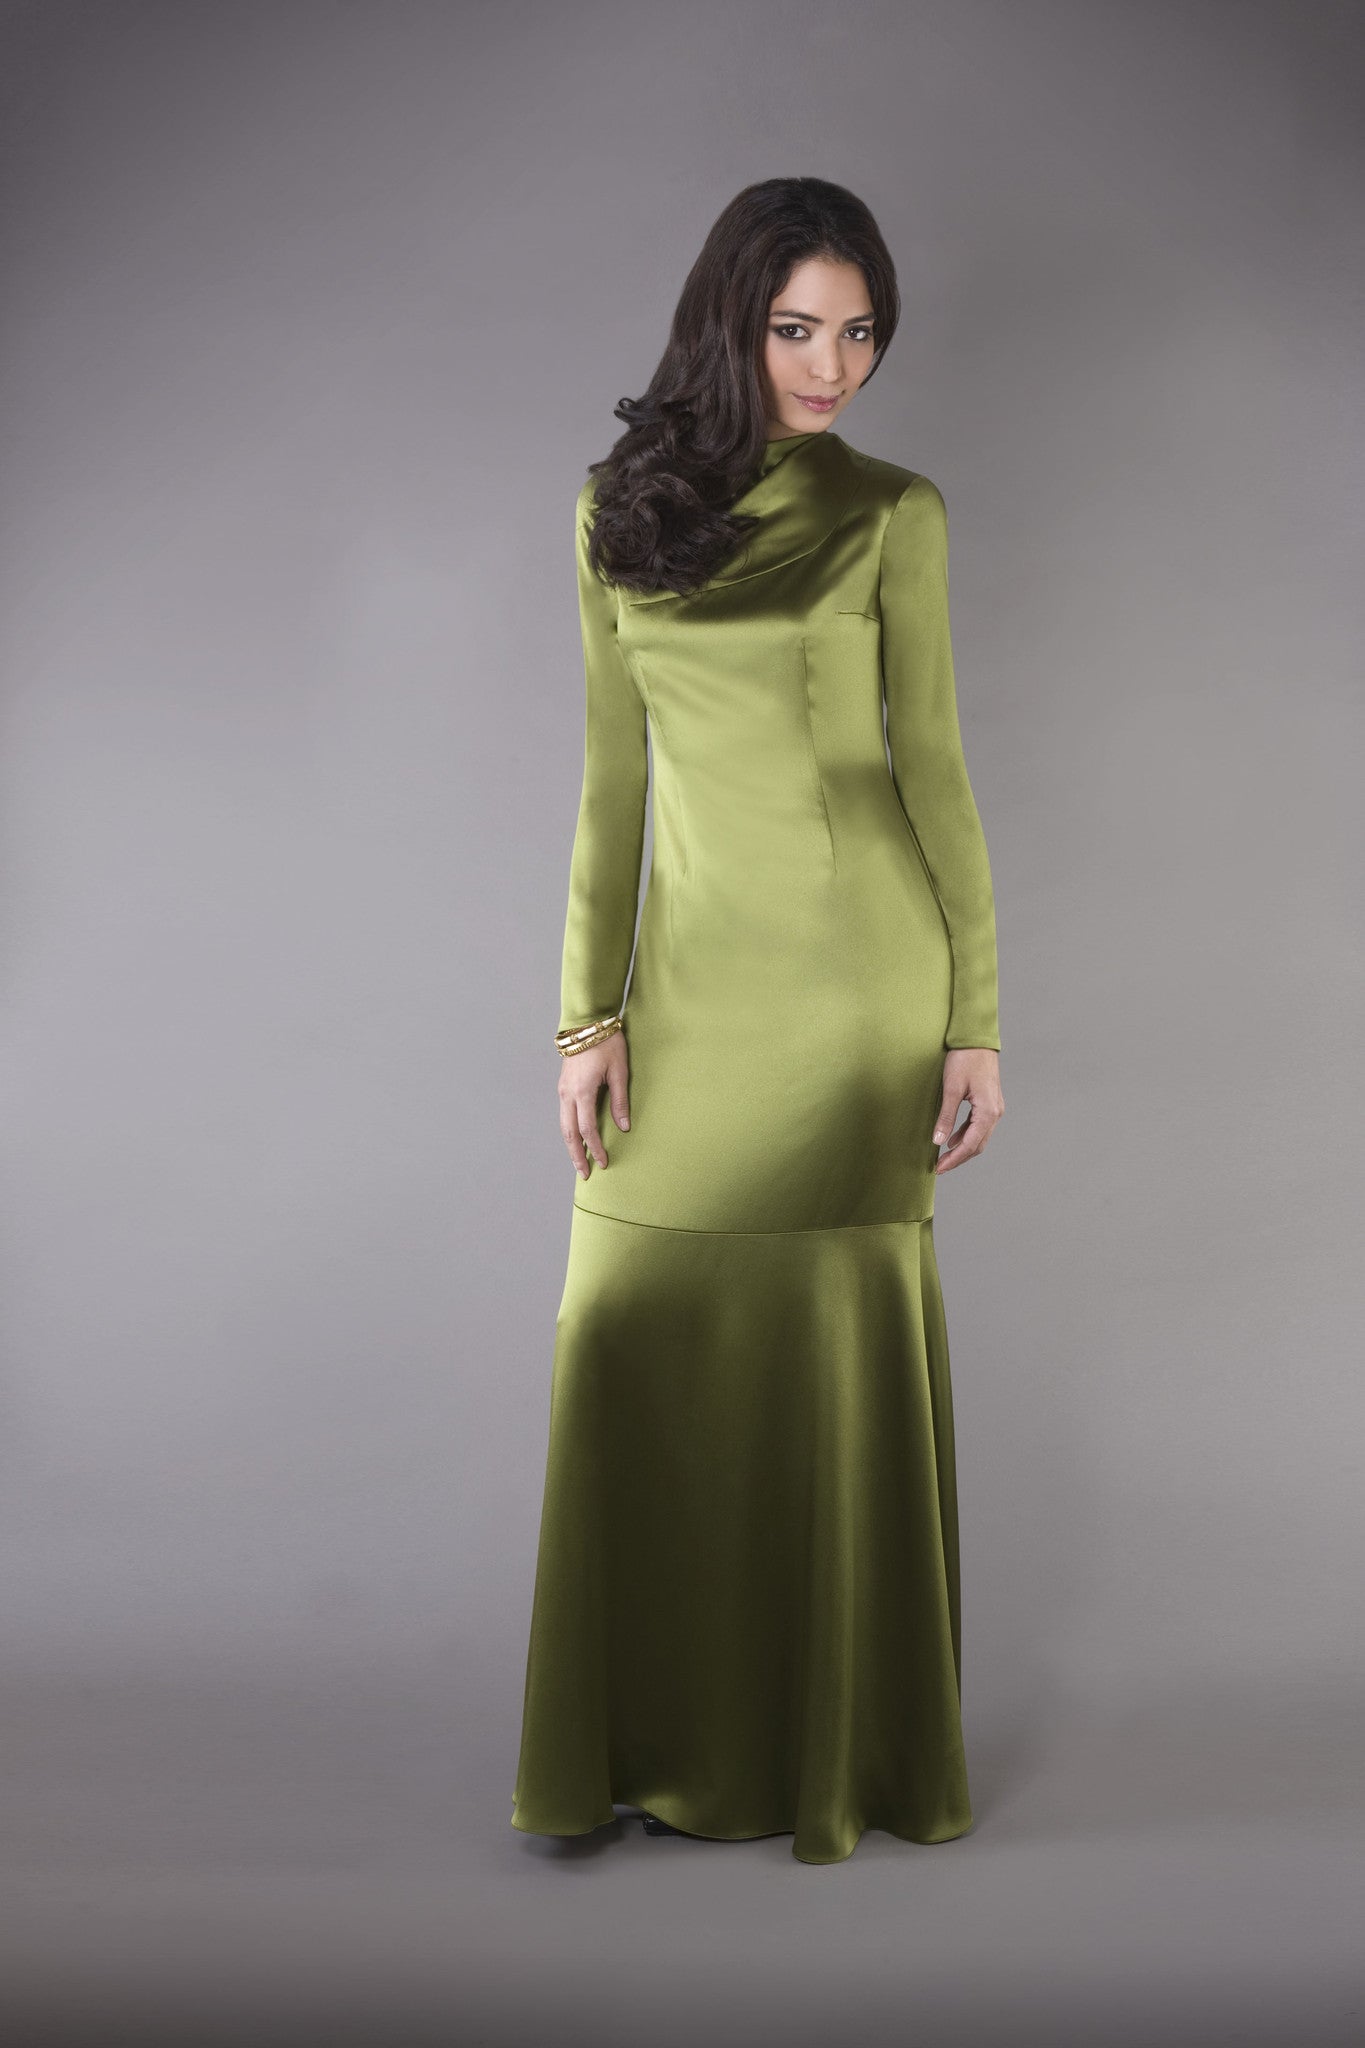 Elegant, long-sleeved modest hijab friendly olive green satin column gown with pleated draped neckline detailing.